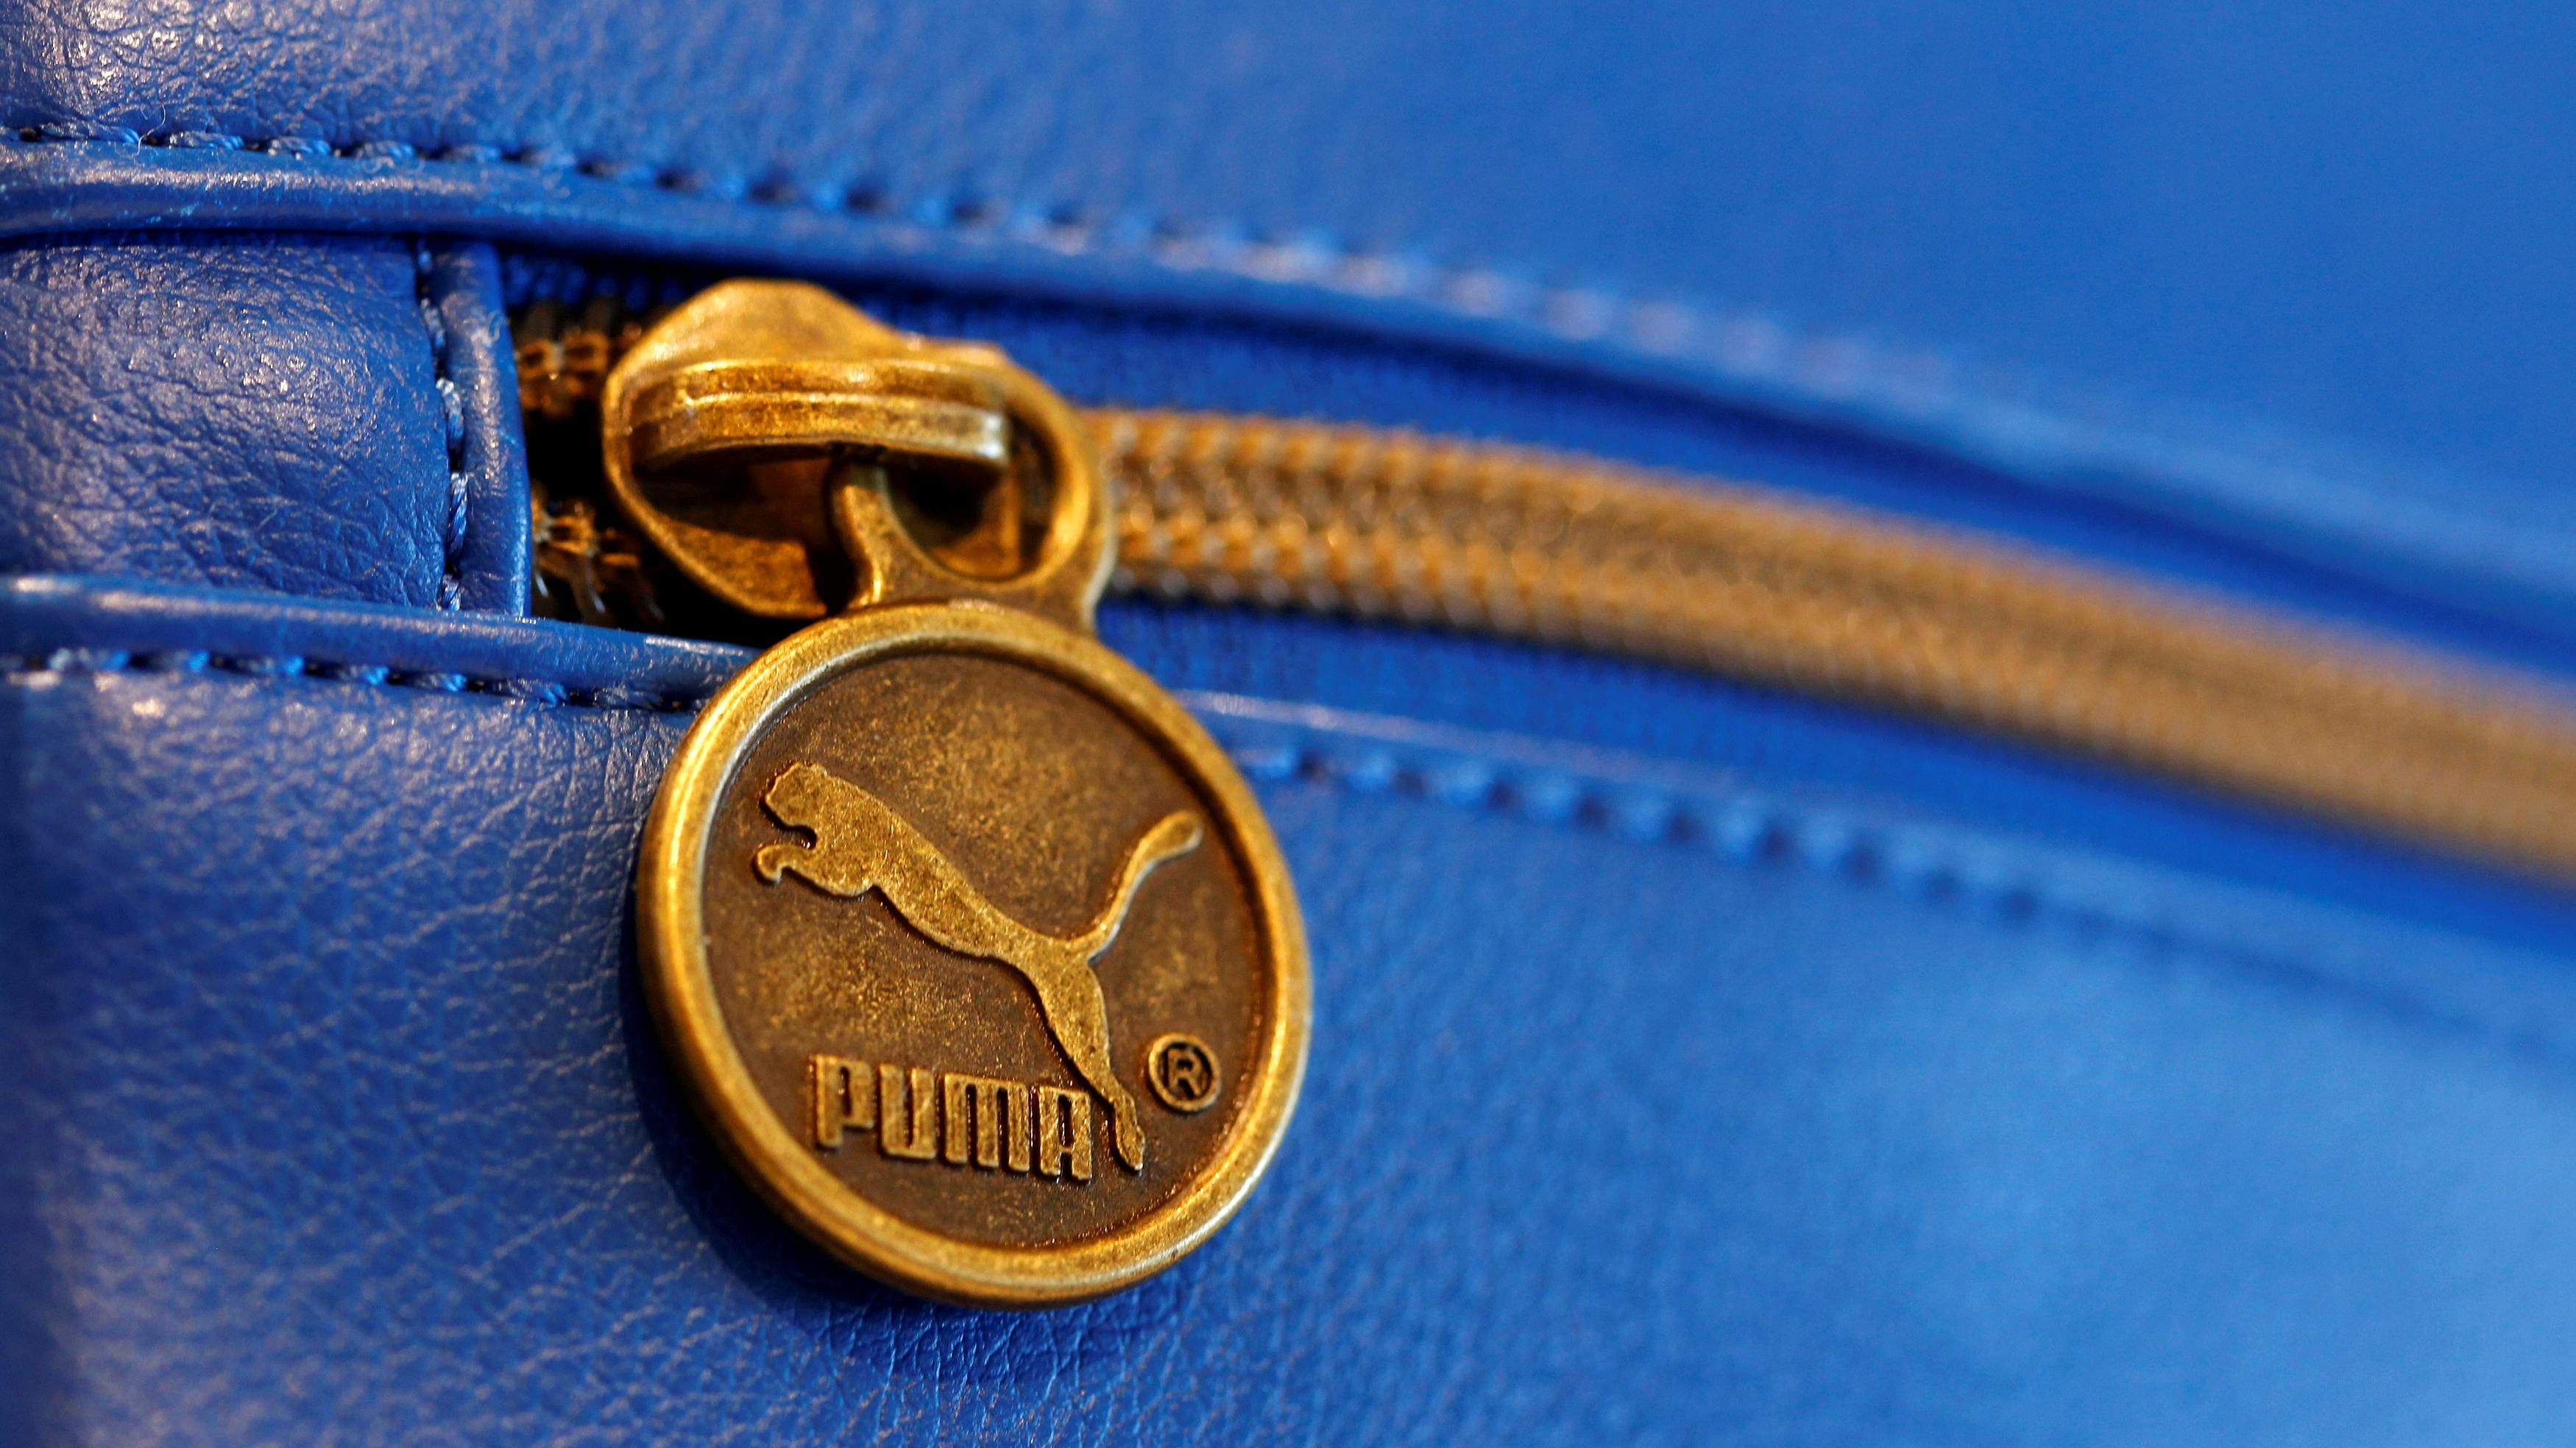 For the full year, Puma expects at least a moderate increase in sales in constant currency, with an upside potential, and a significant improvement compared with 2020 for both its operating and net profit. Credit: Reuters